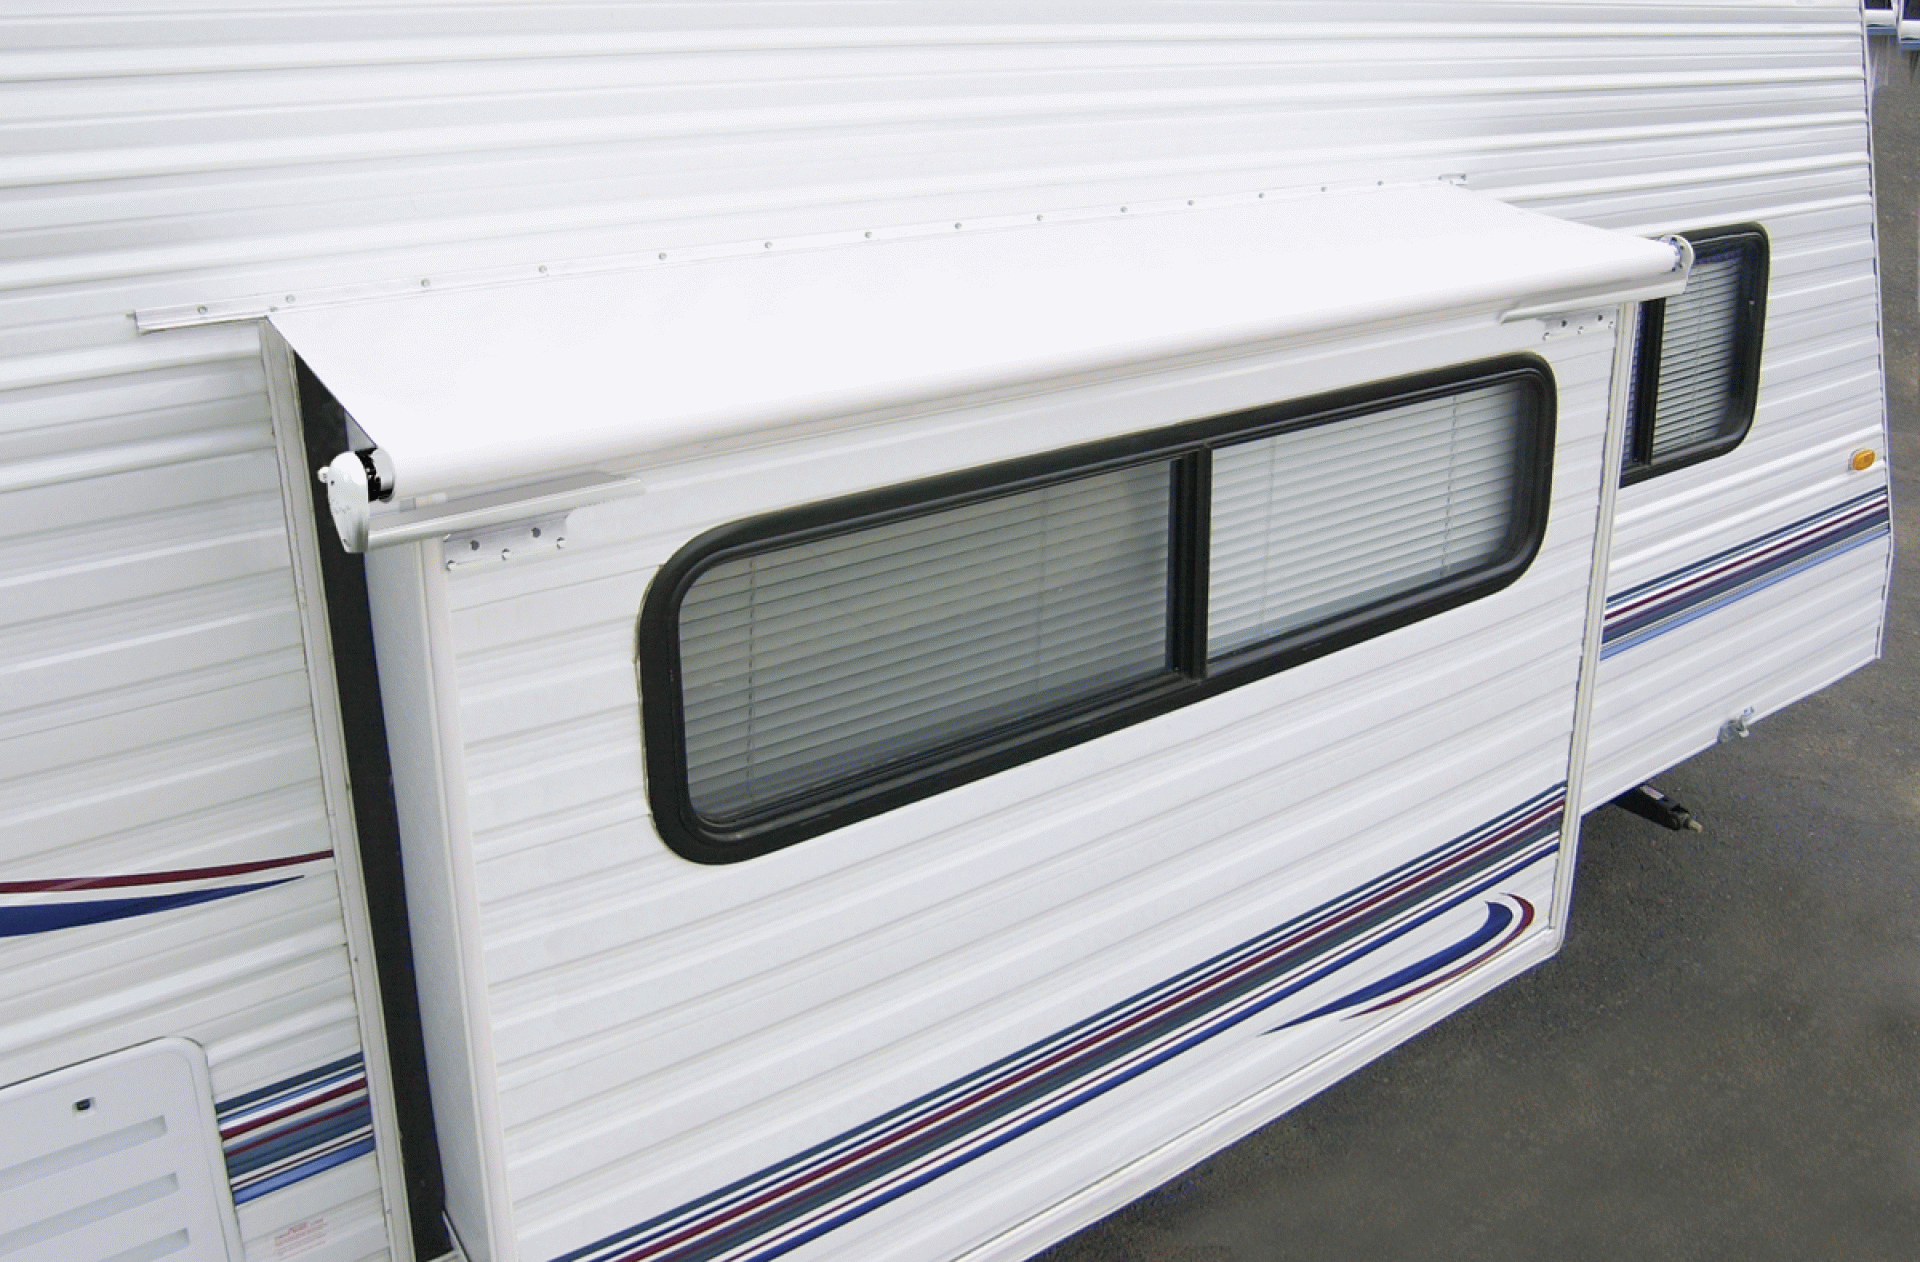 CAREFREE OF COLORADO | LH1050042 | SLIDEOUT COVER AWNING 98" - 105.9" ROOF RANGE WHITE VINYL